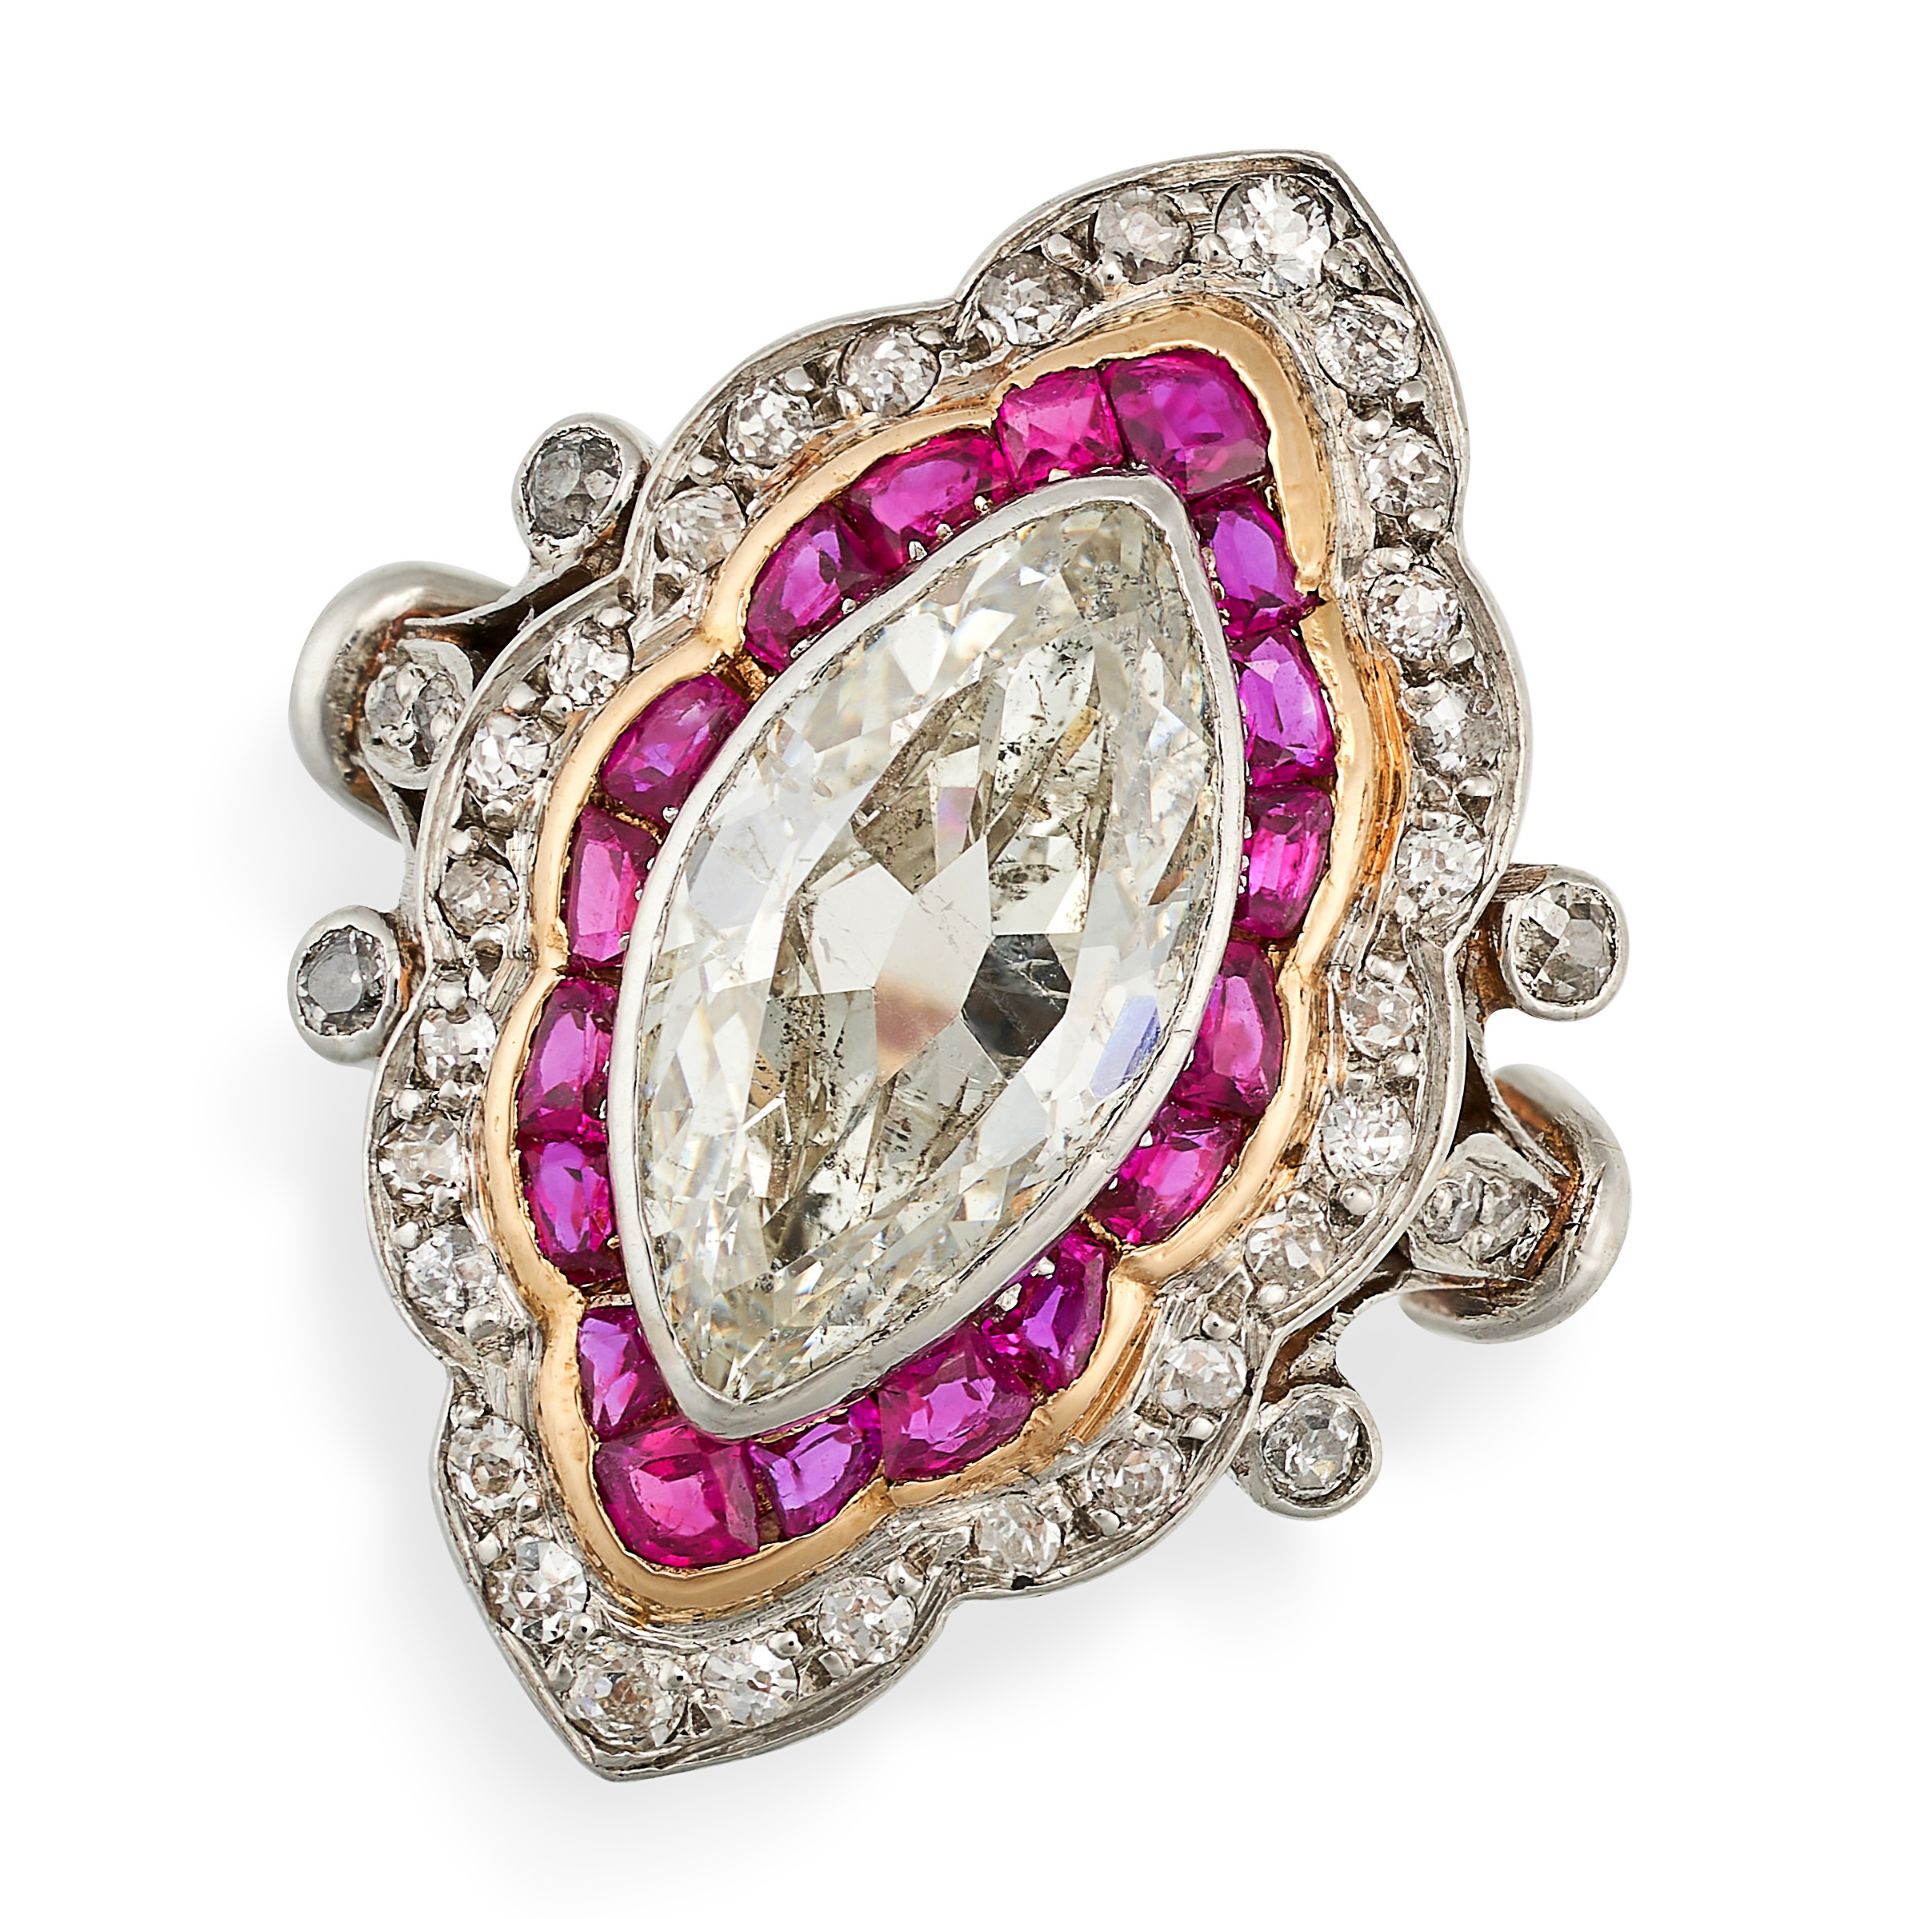 AN ANTIQUE FRENCH DIAMOND AND RUBY DRESS RING in platinum and 18ct yellow gold, set with a